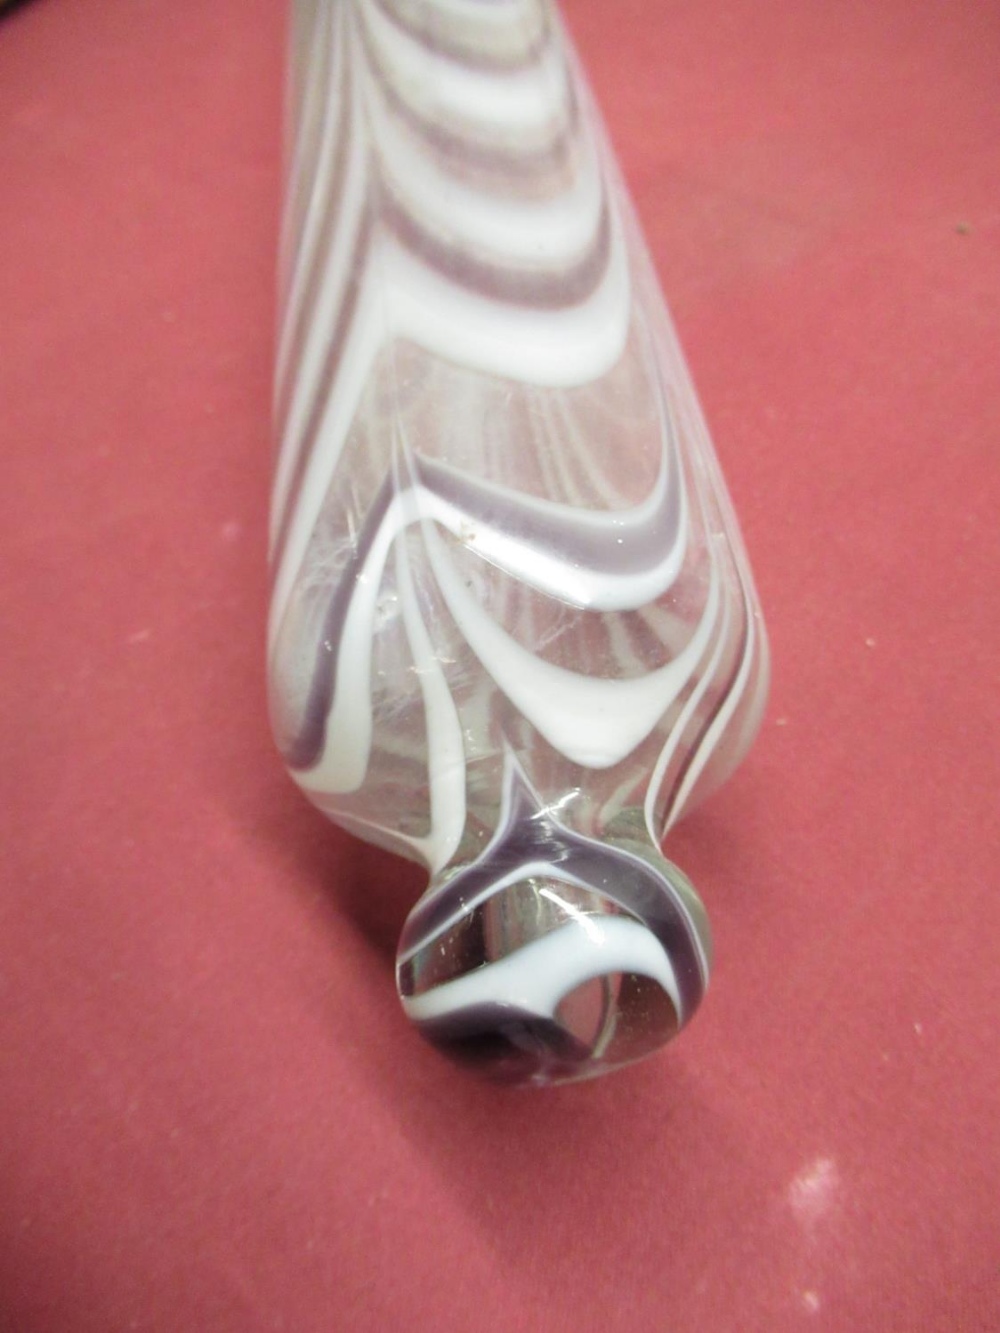 Two Mdina style glass fish, Mdina style glass rolling pin, two glass ships in bottles etc - Image 2 of 3